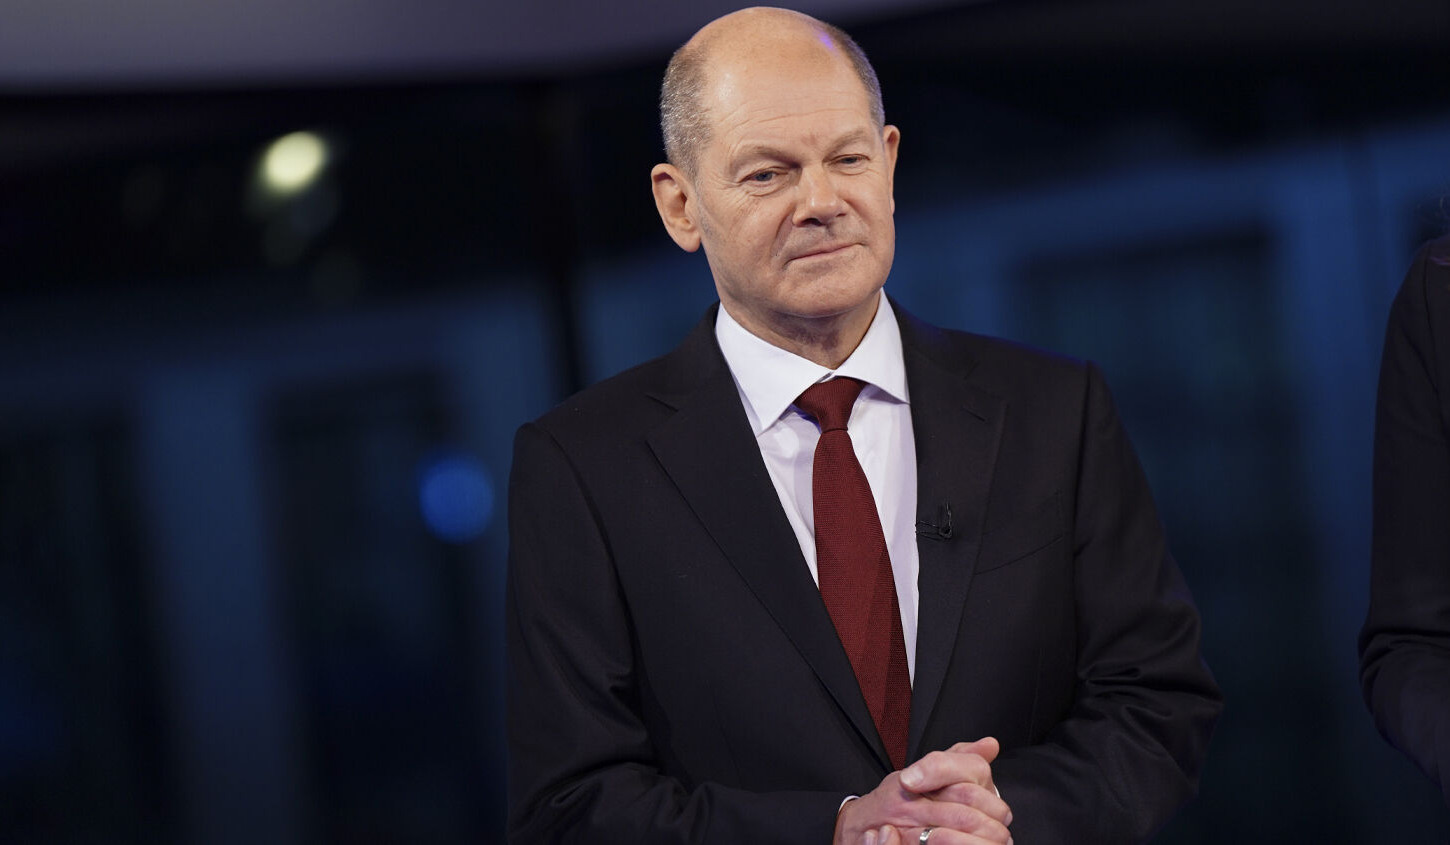 Scholz proposed to simplify process of entry of new countries into EU